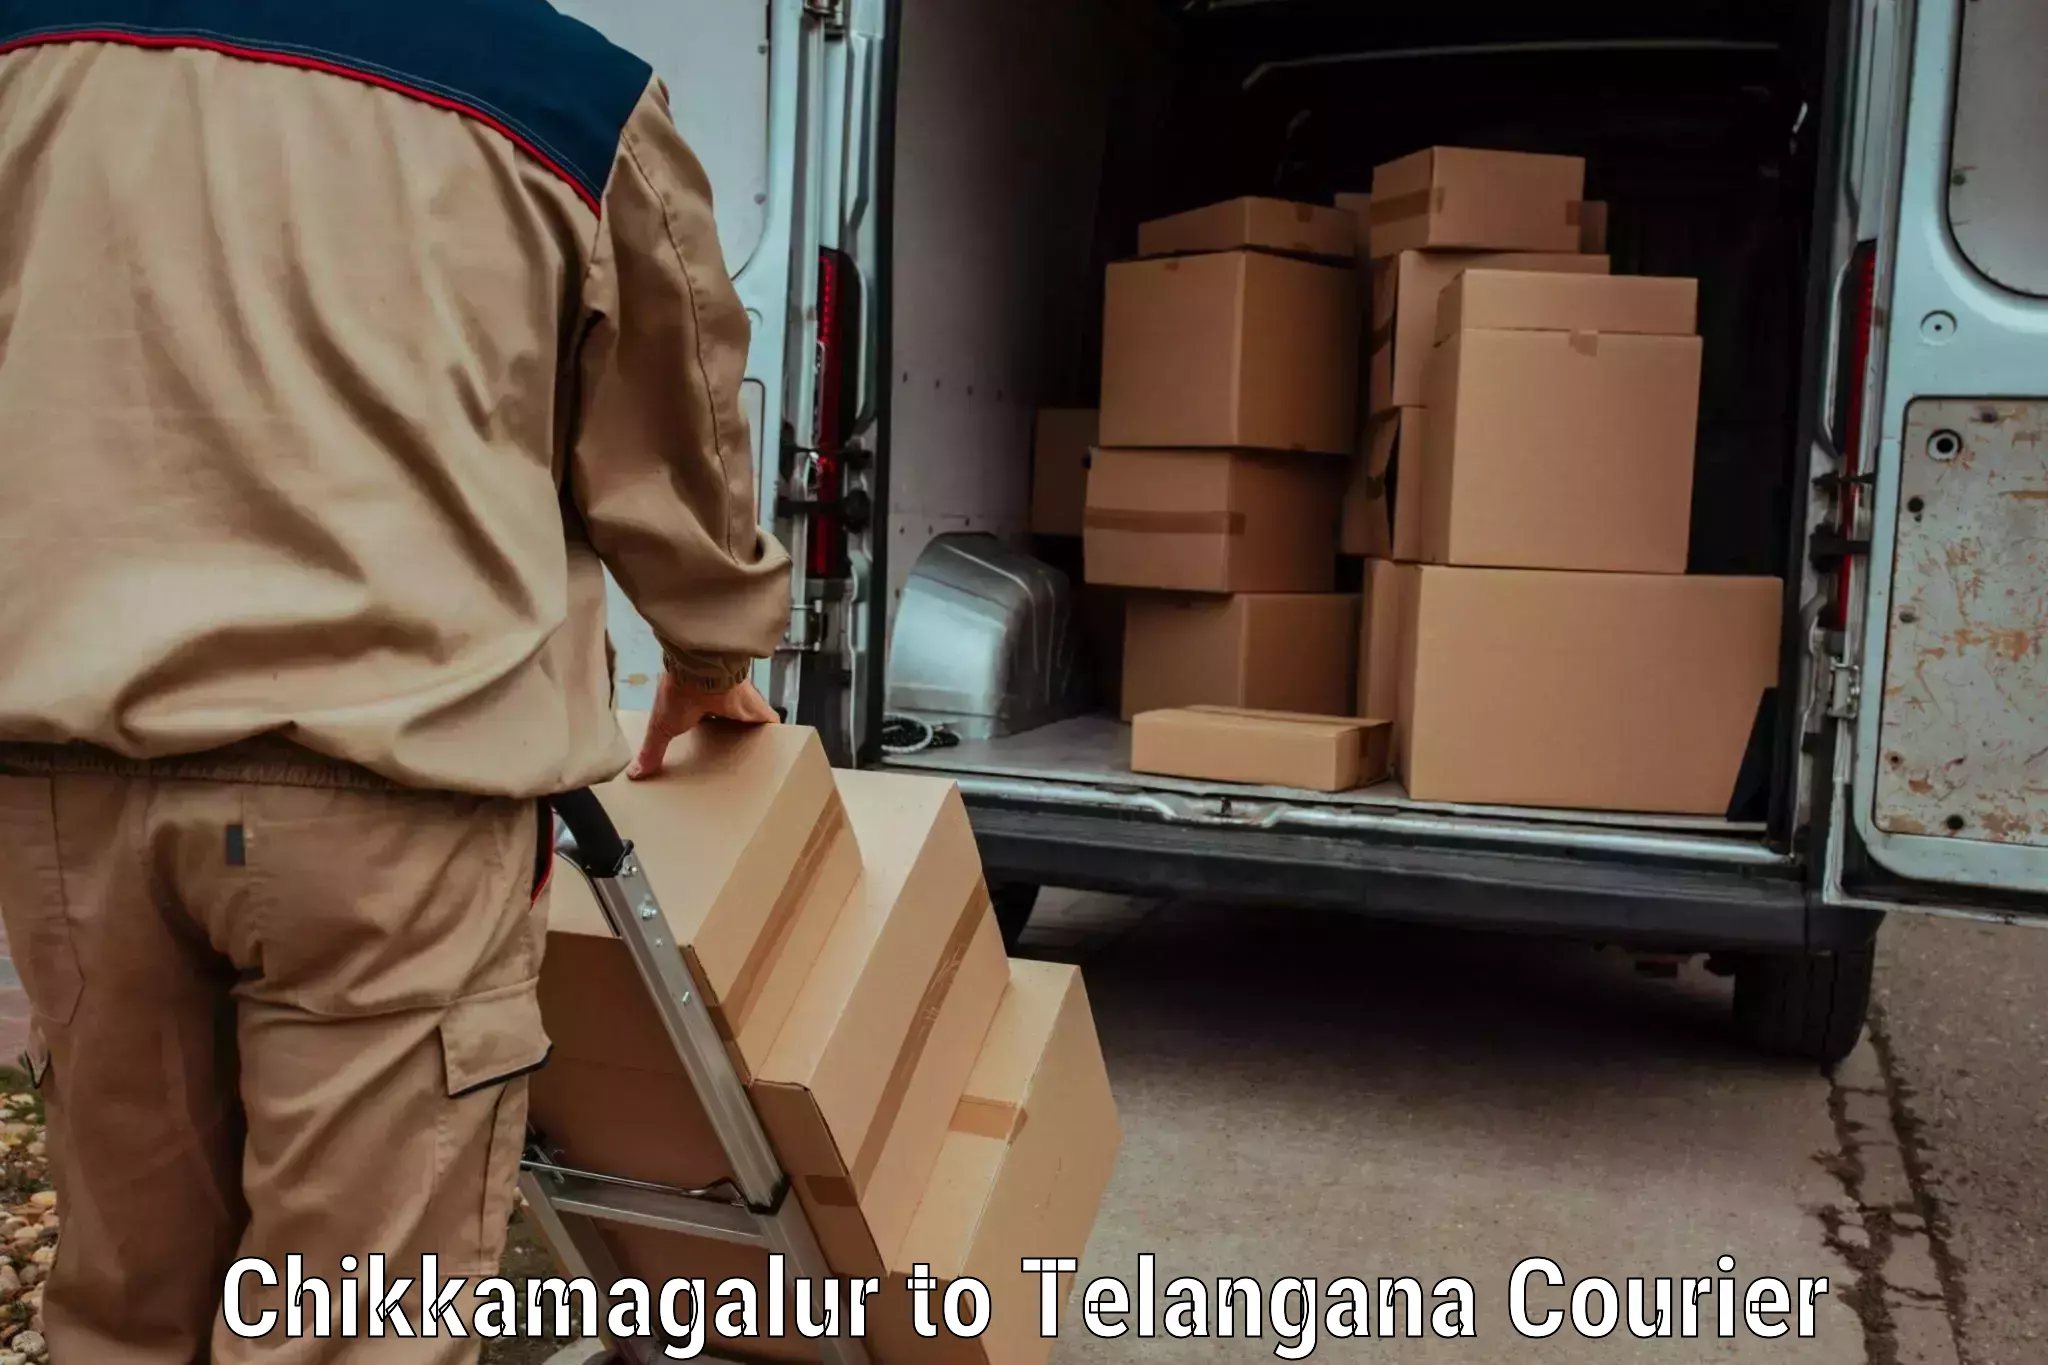 Courier services in Chikkamagalur to Kacheguda